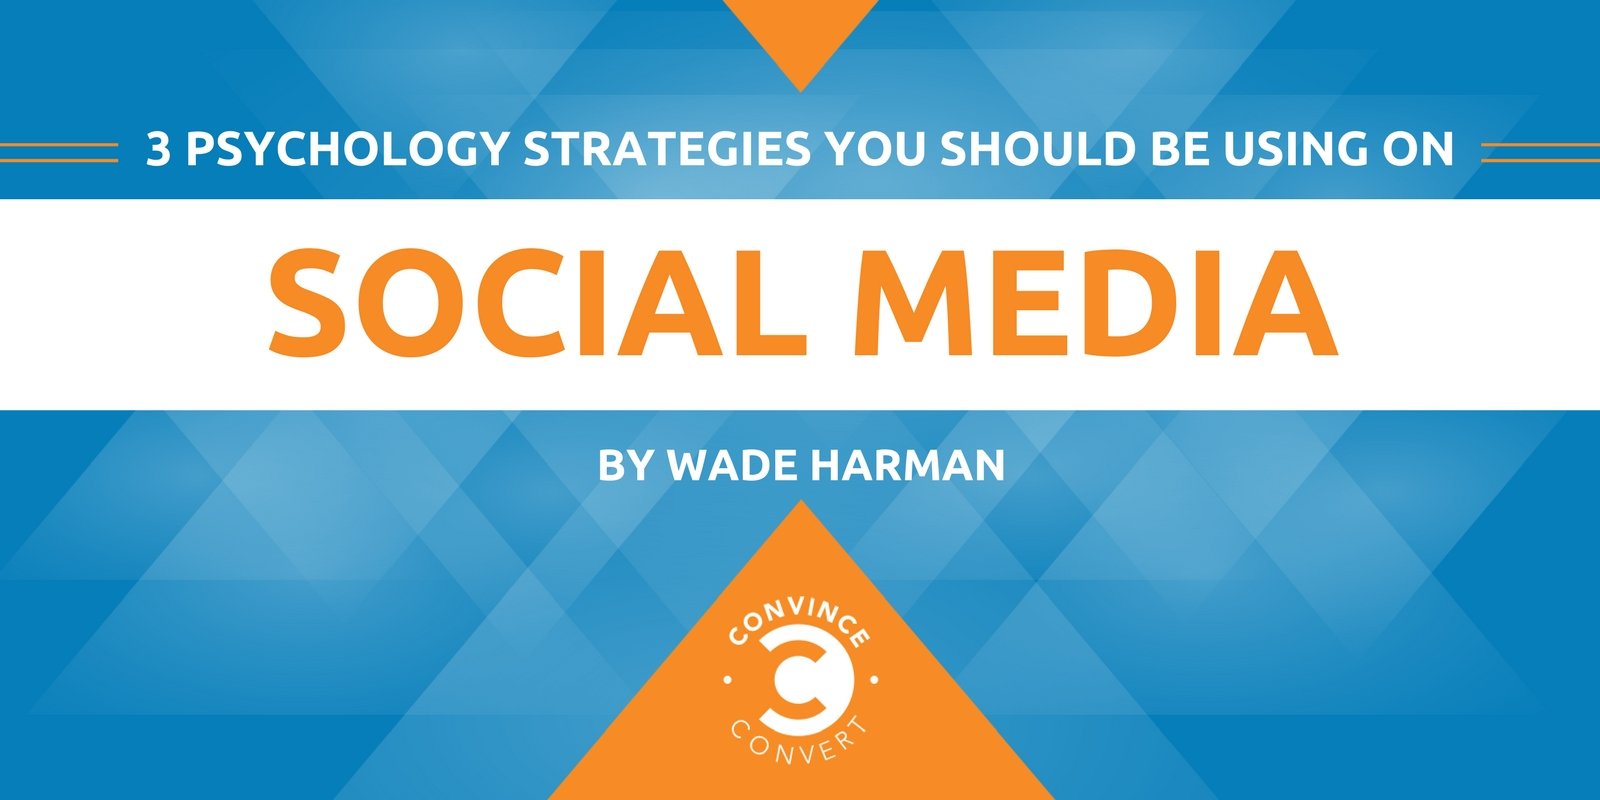 3 Psychology Strategies You Should Be Using on Social Media